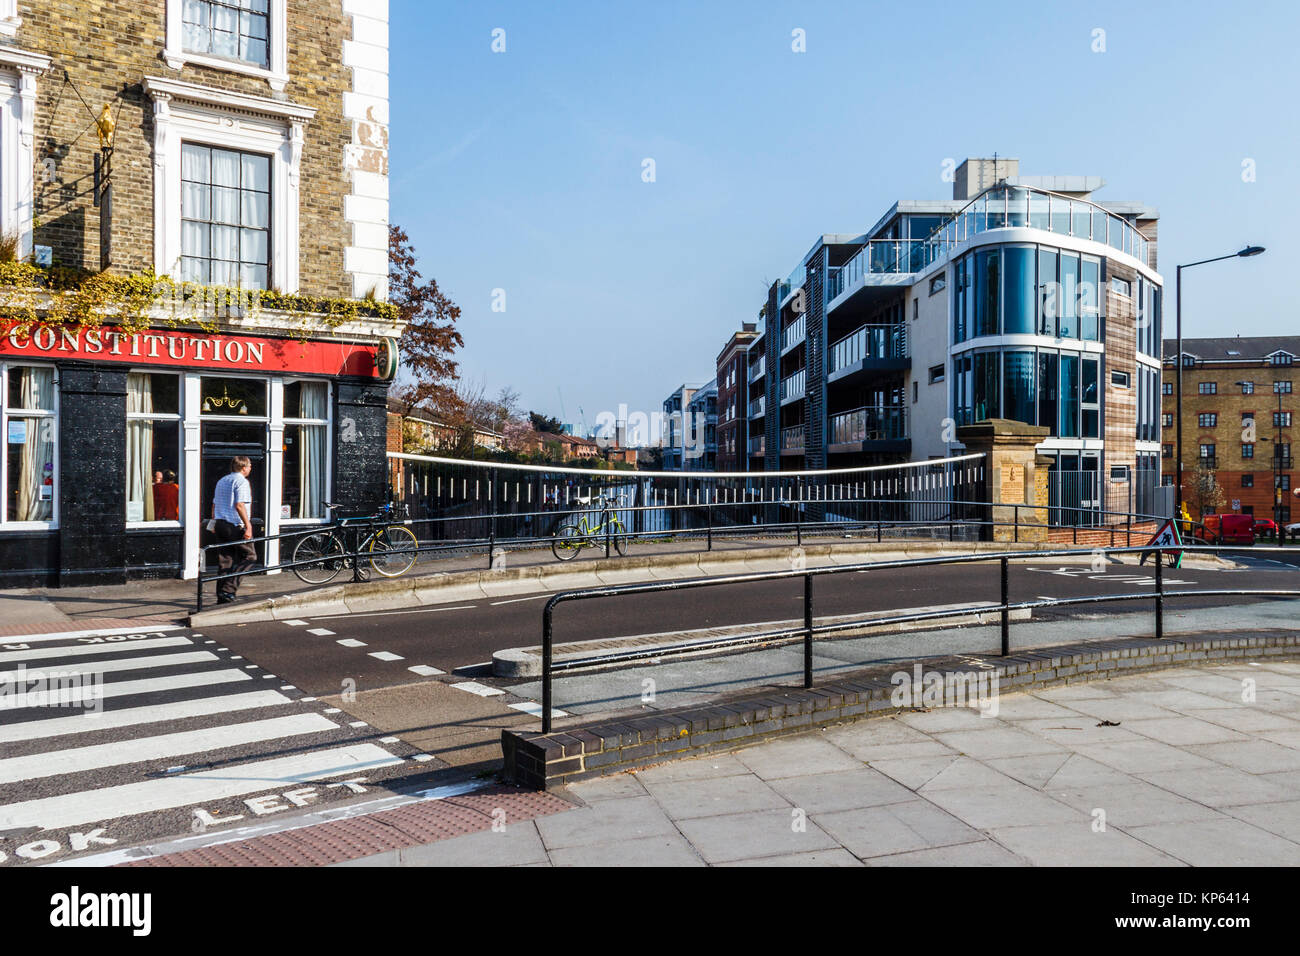 The Constitution pub by Regent's Canal on St Pancras Way, London, UK Stock Photo